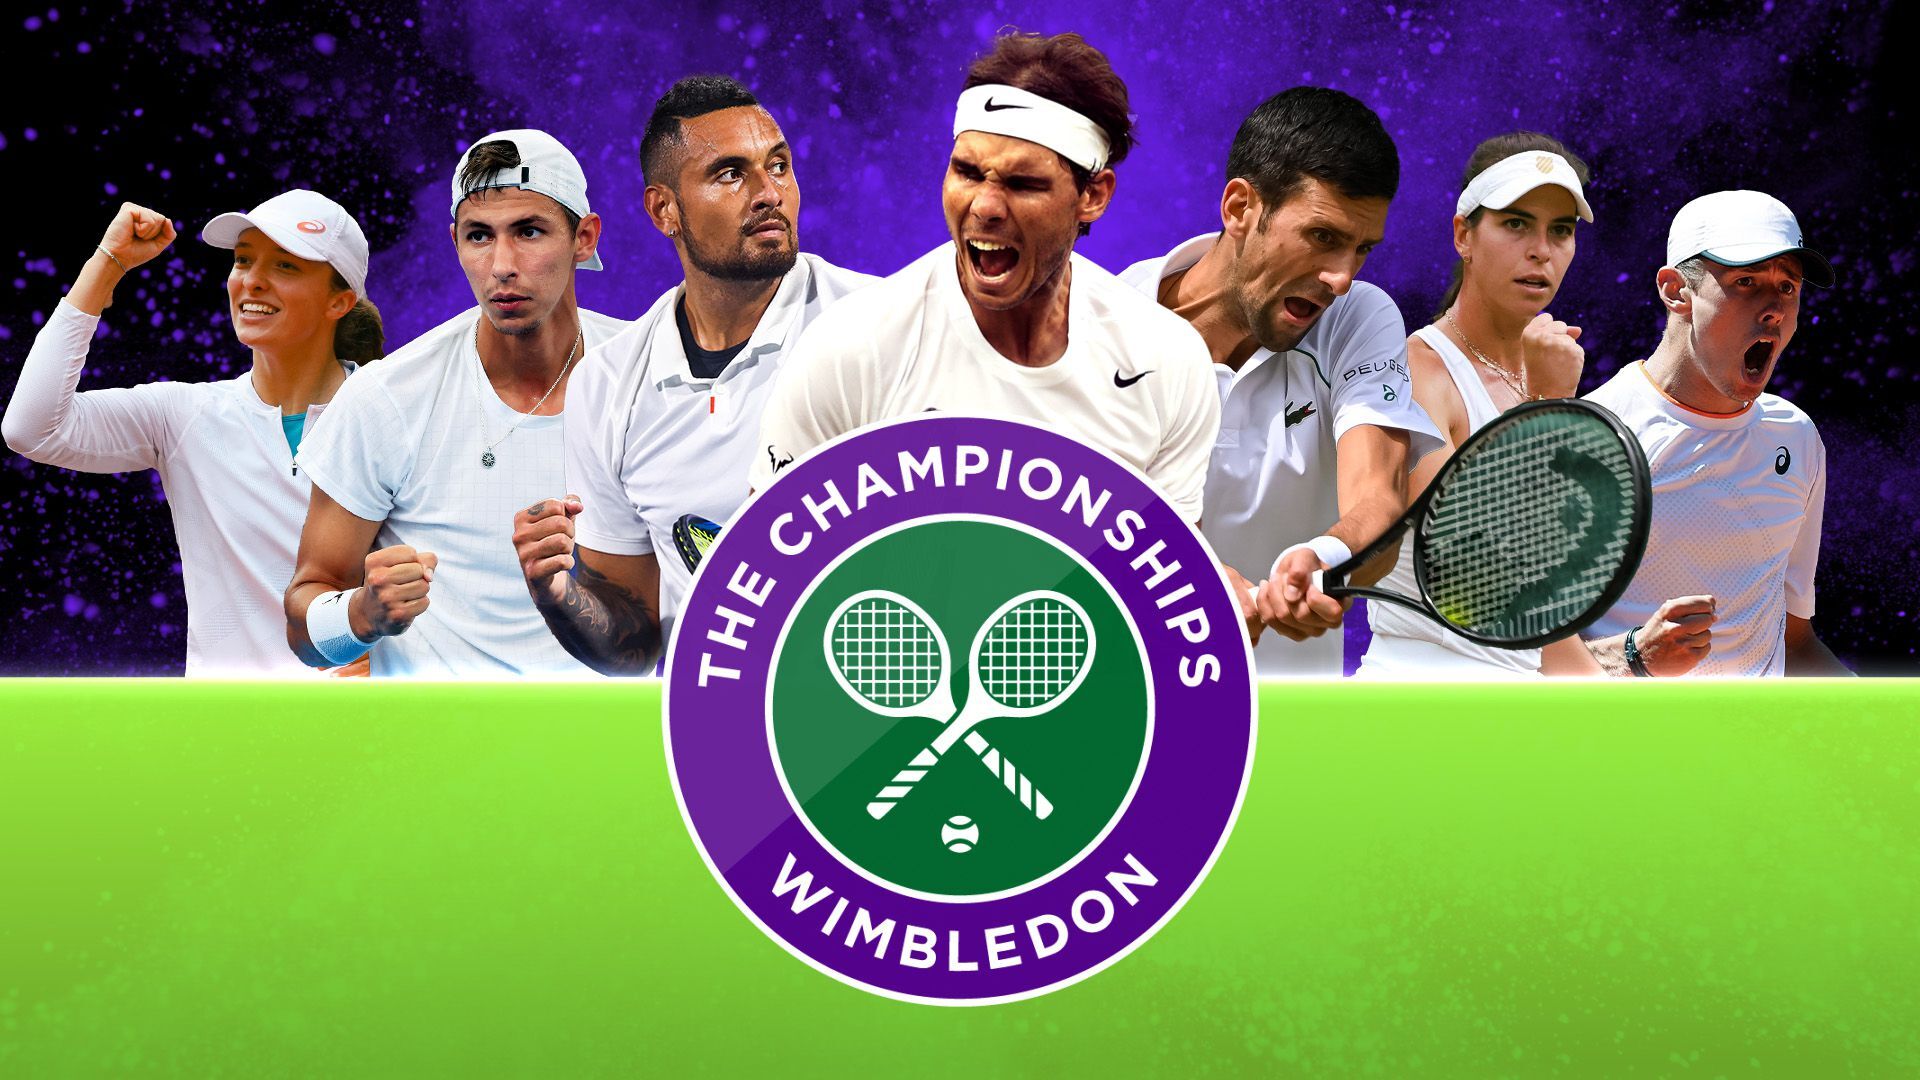 Wimbledon 2022 starts Monday on Channel 9HD and Stan Sport Nine for